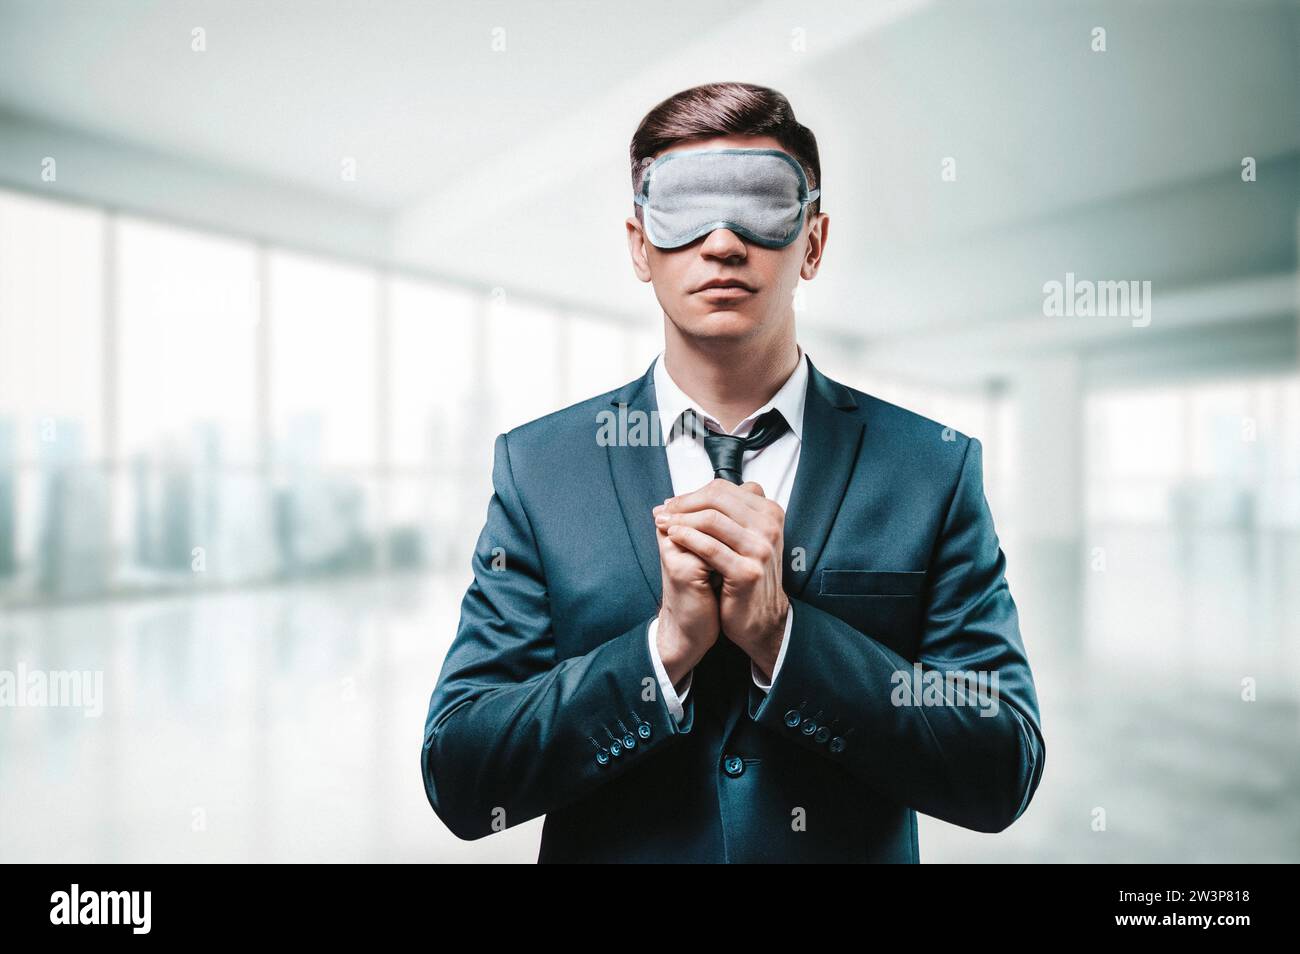 Portrait of a man in a business suit. He is praying while standing in the office. He has a sleep mask on his eyes. Blind business concept. Mixed media Stock Photo